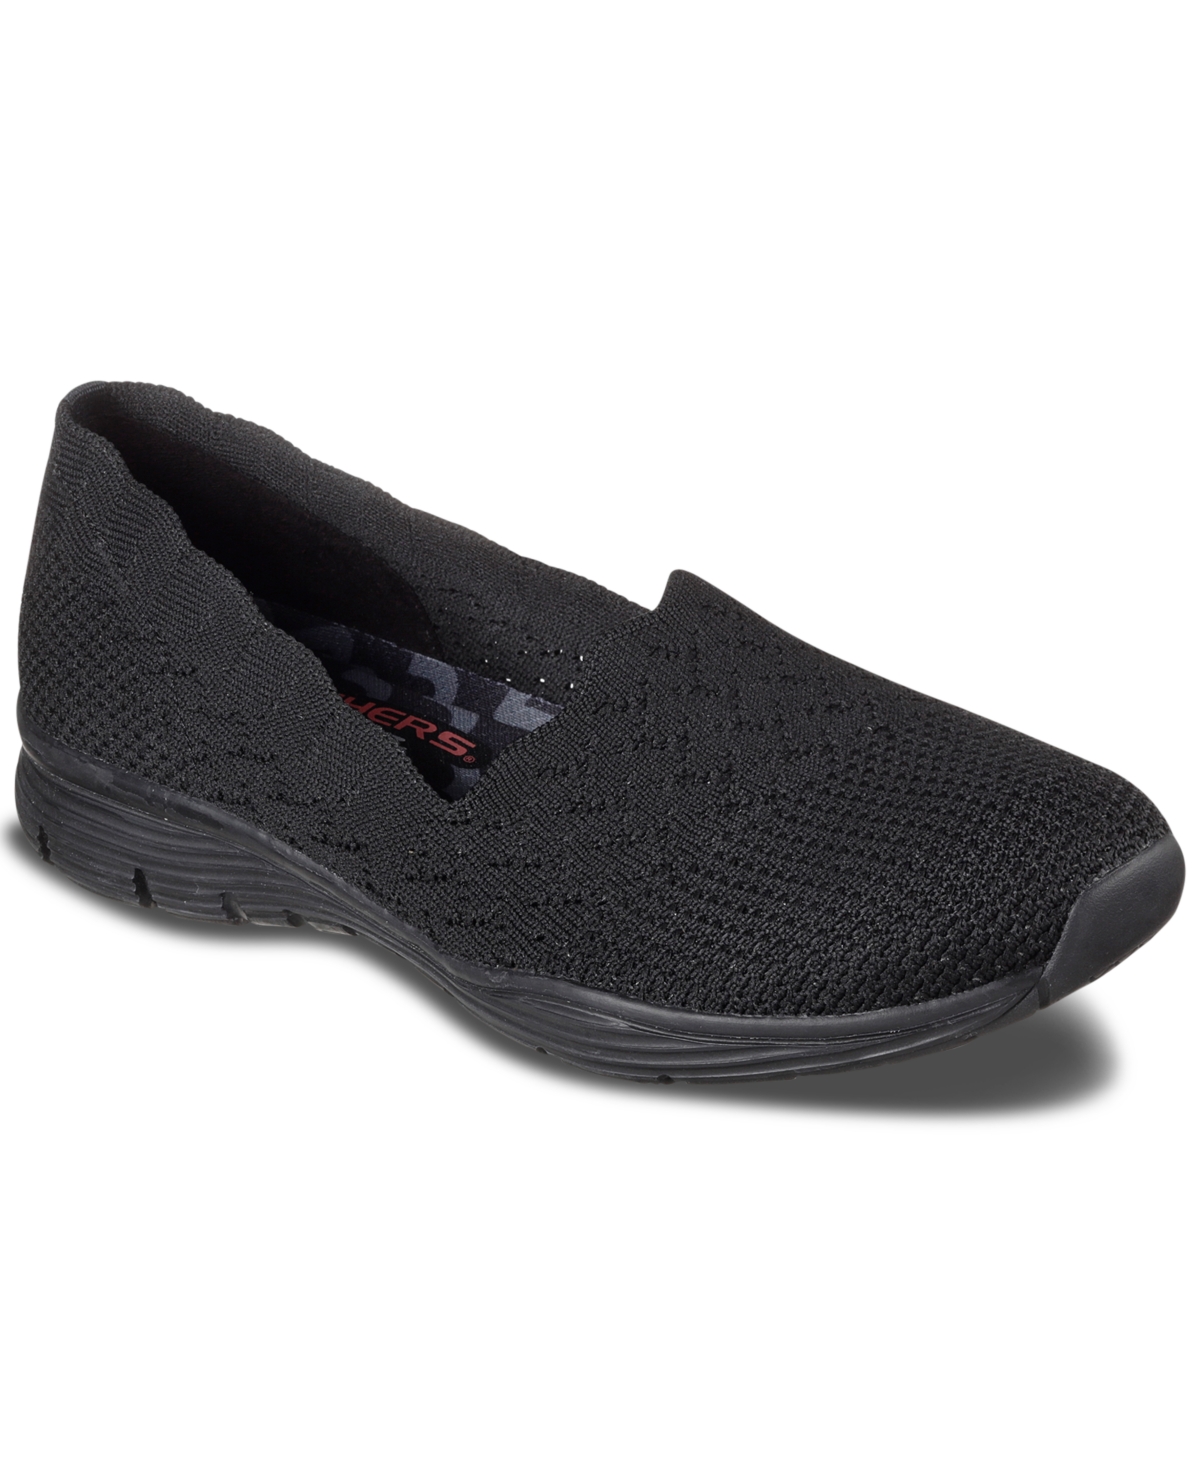 Wide Seager - Stat Slip-On Wide Width Casual Sneakers from Finish Line - Black